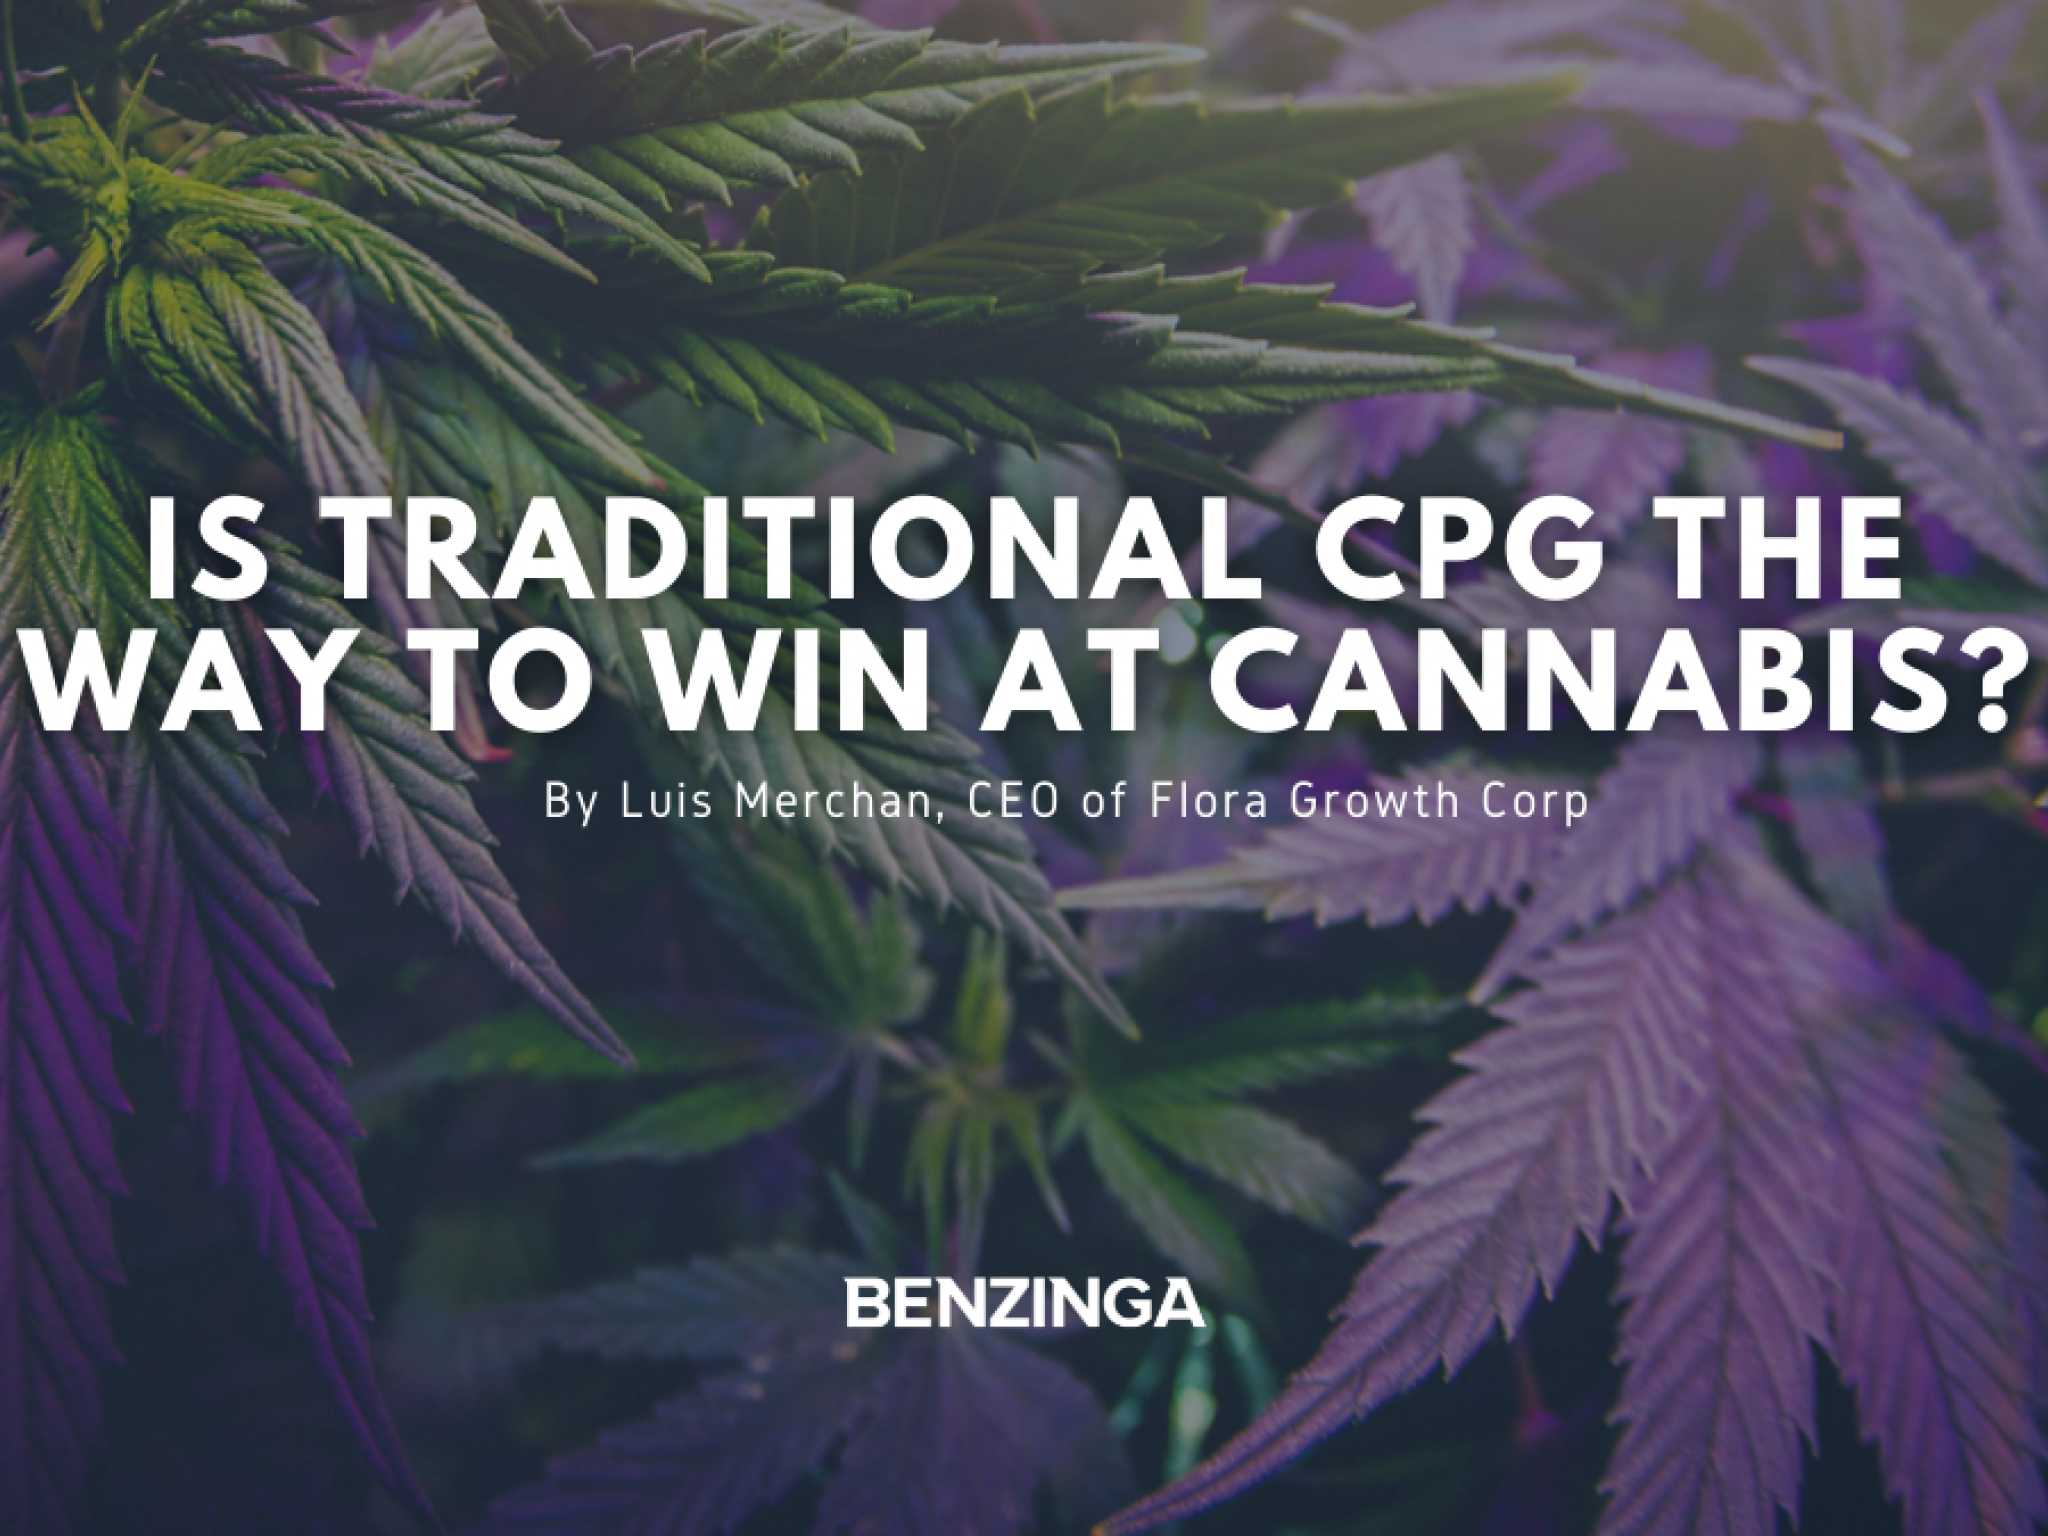 is-traditional-cpg-the-way-to-win-at-cannabis